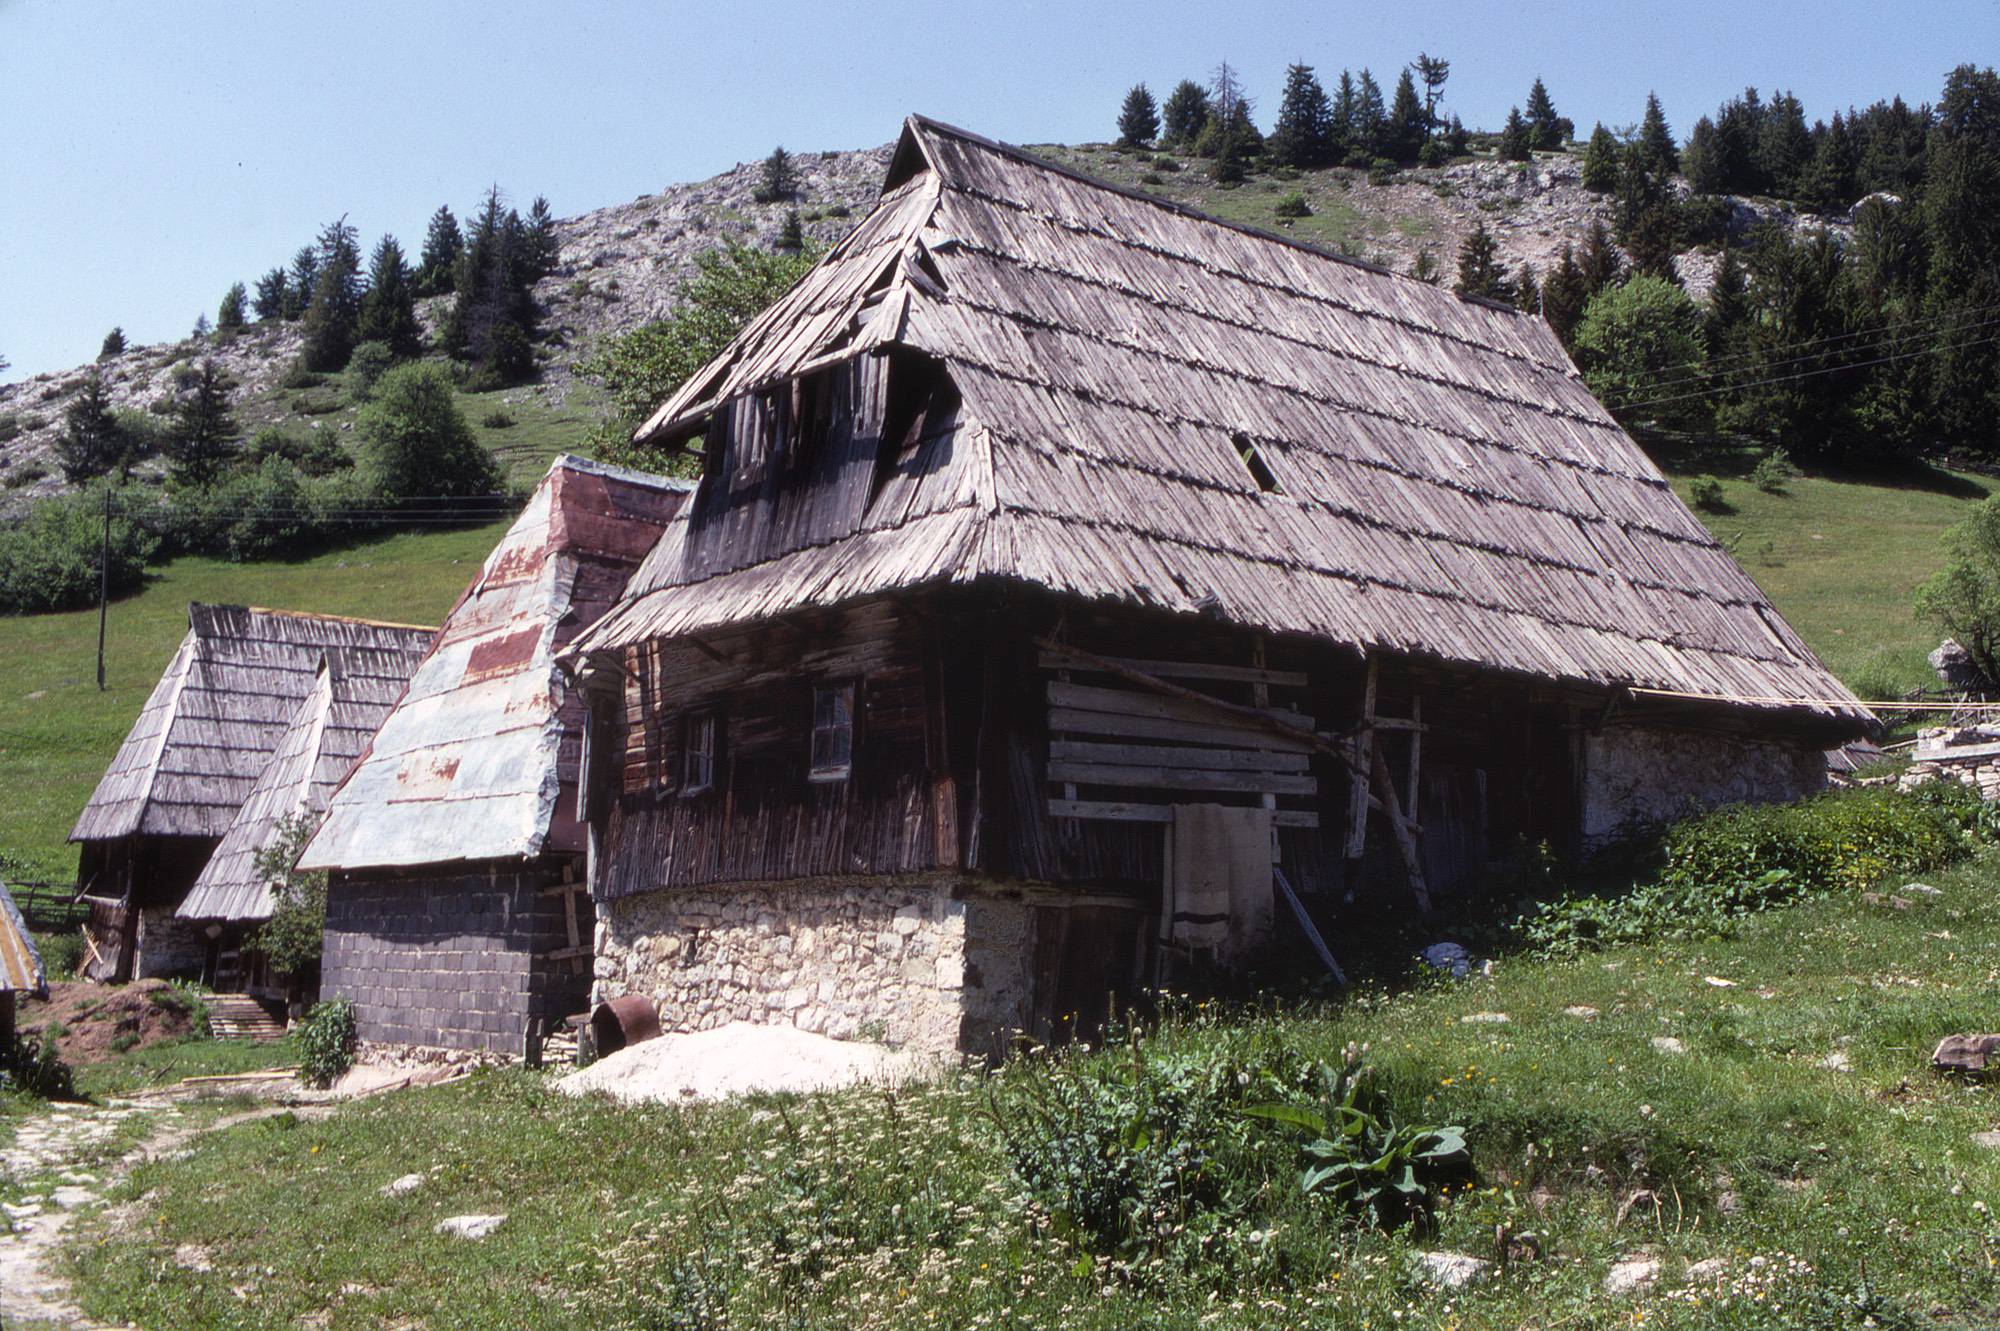 <p>An abandoned house with a roof-bound čardak space, with other structures, in this former sheep-herding village. The house upper level is primarily of wooden construction, including vertical plank wall siding, while the buildings beyond are largely of stone.</p>